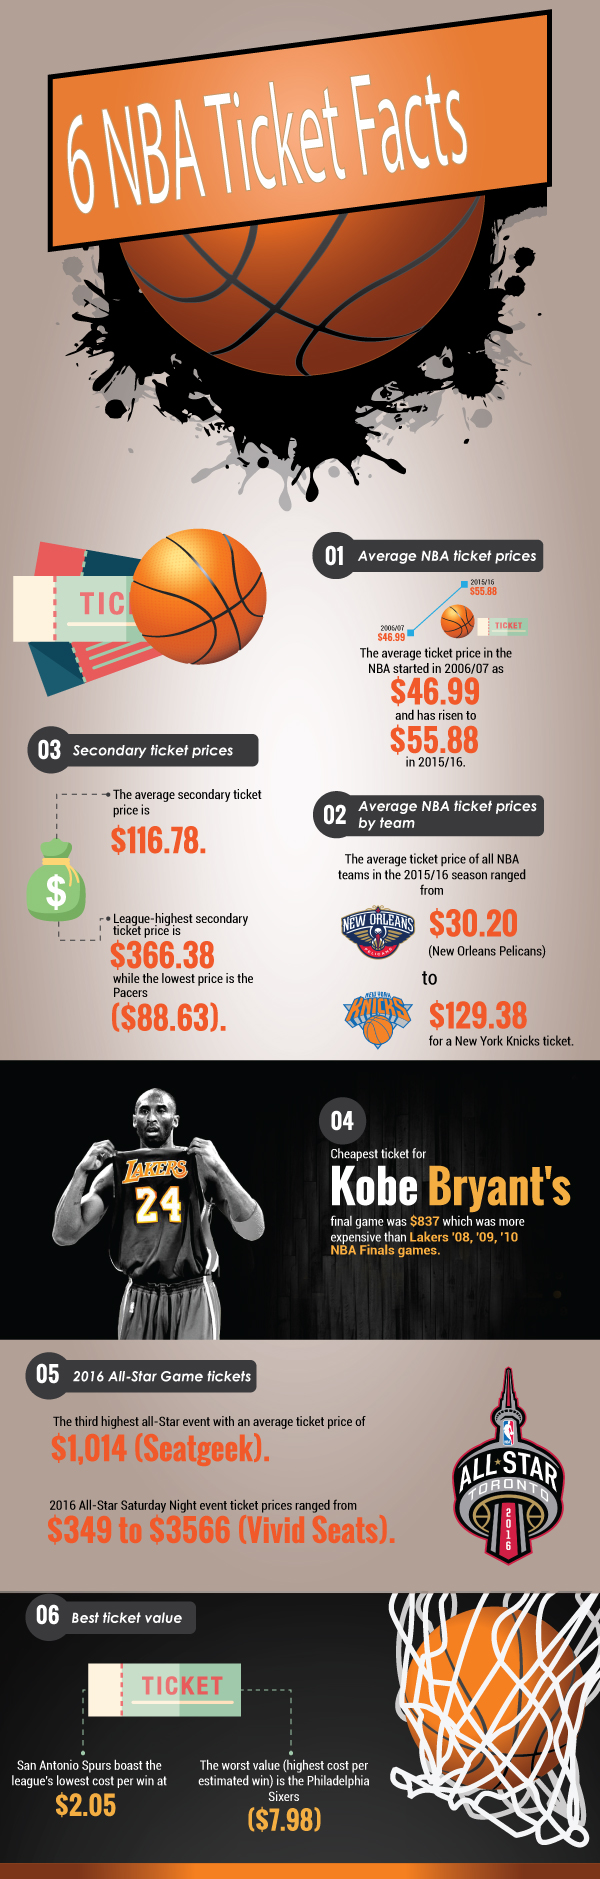 6-nba-ticket-facts-infographic-plaza